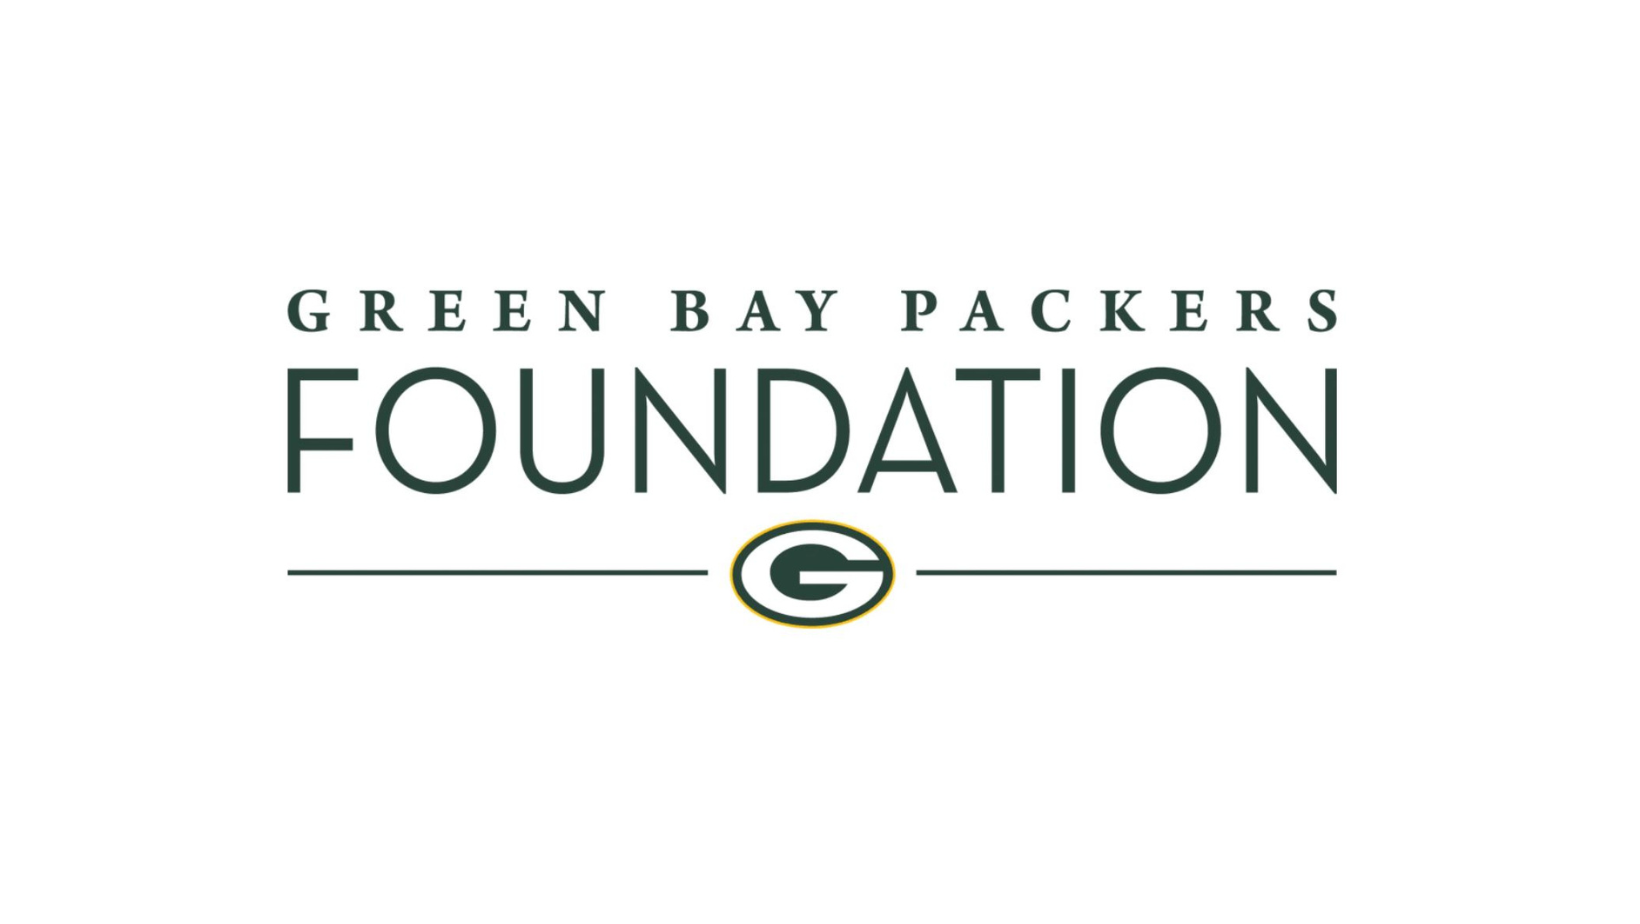 MCFI Foundation receives support from Green Bay Packers Foundation